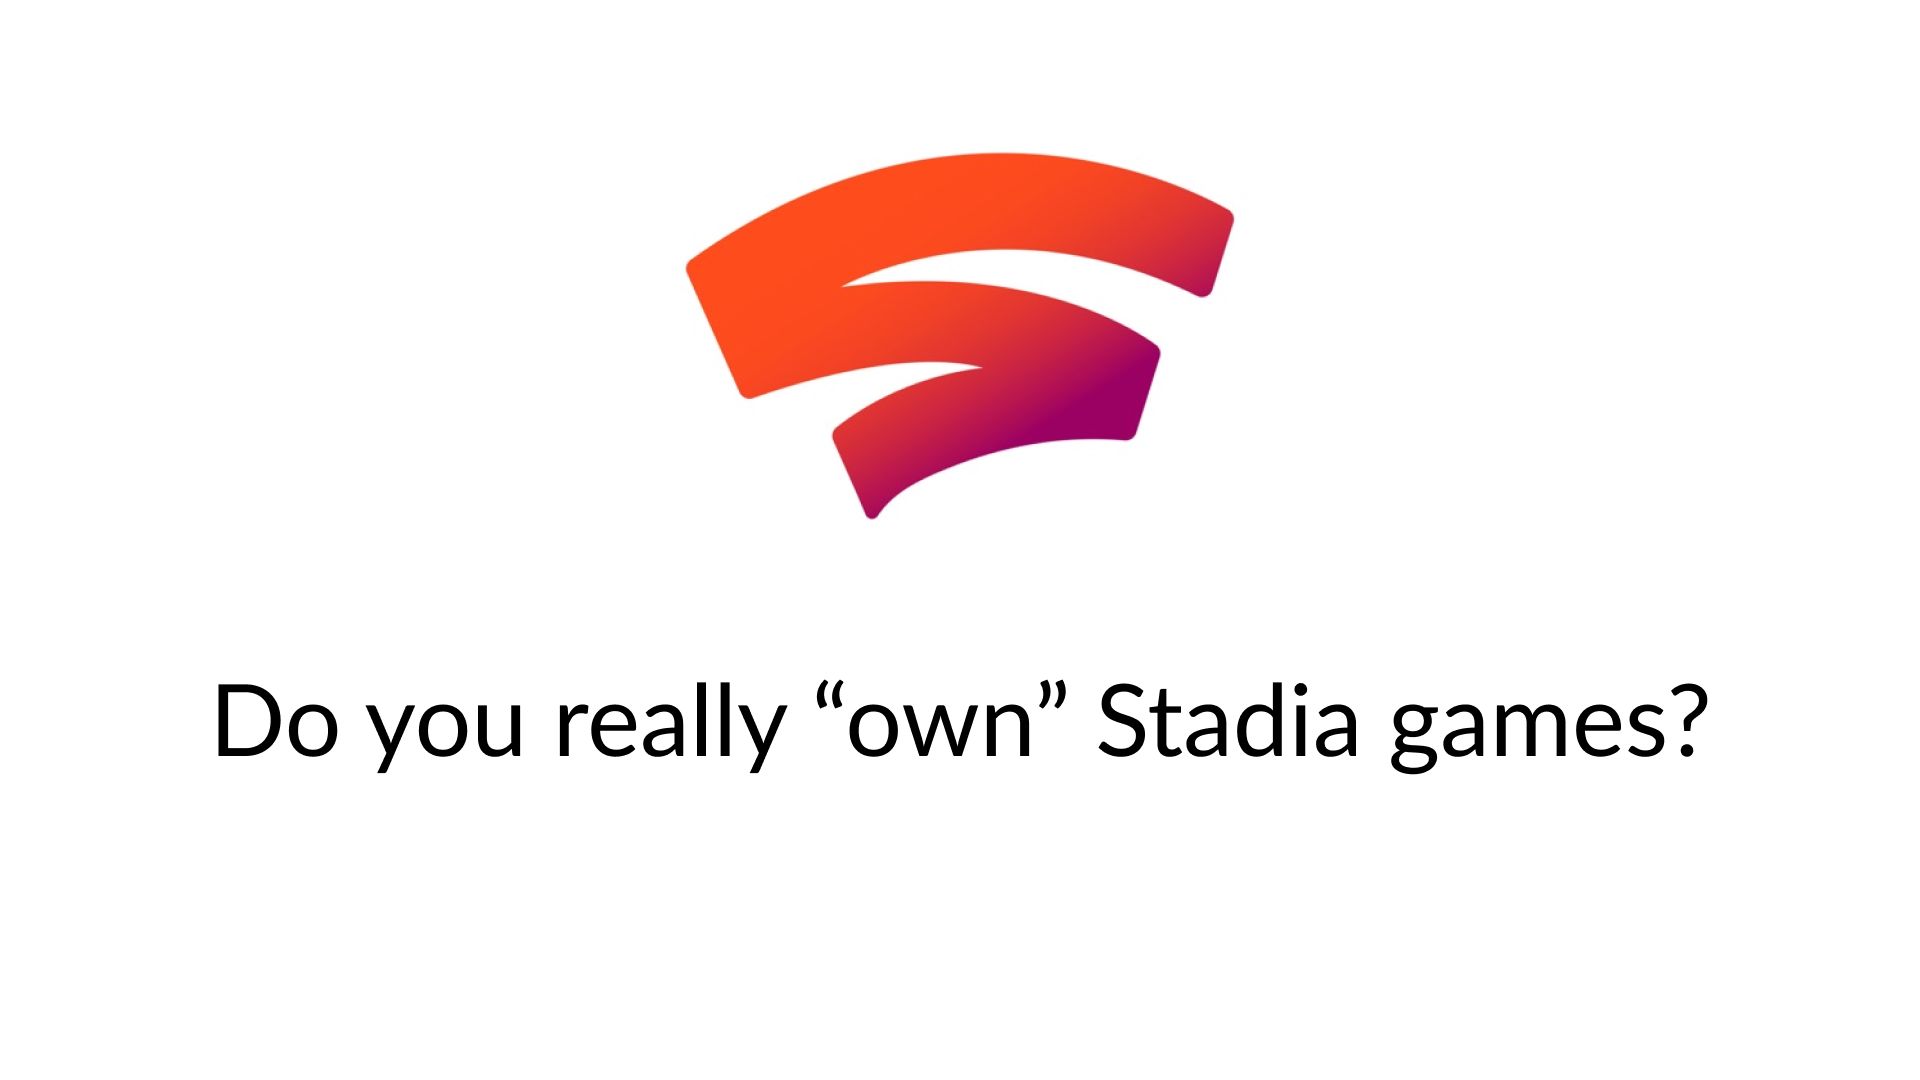 Suggesting You Own Stadia Games is Quite a Stretch